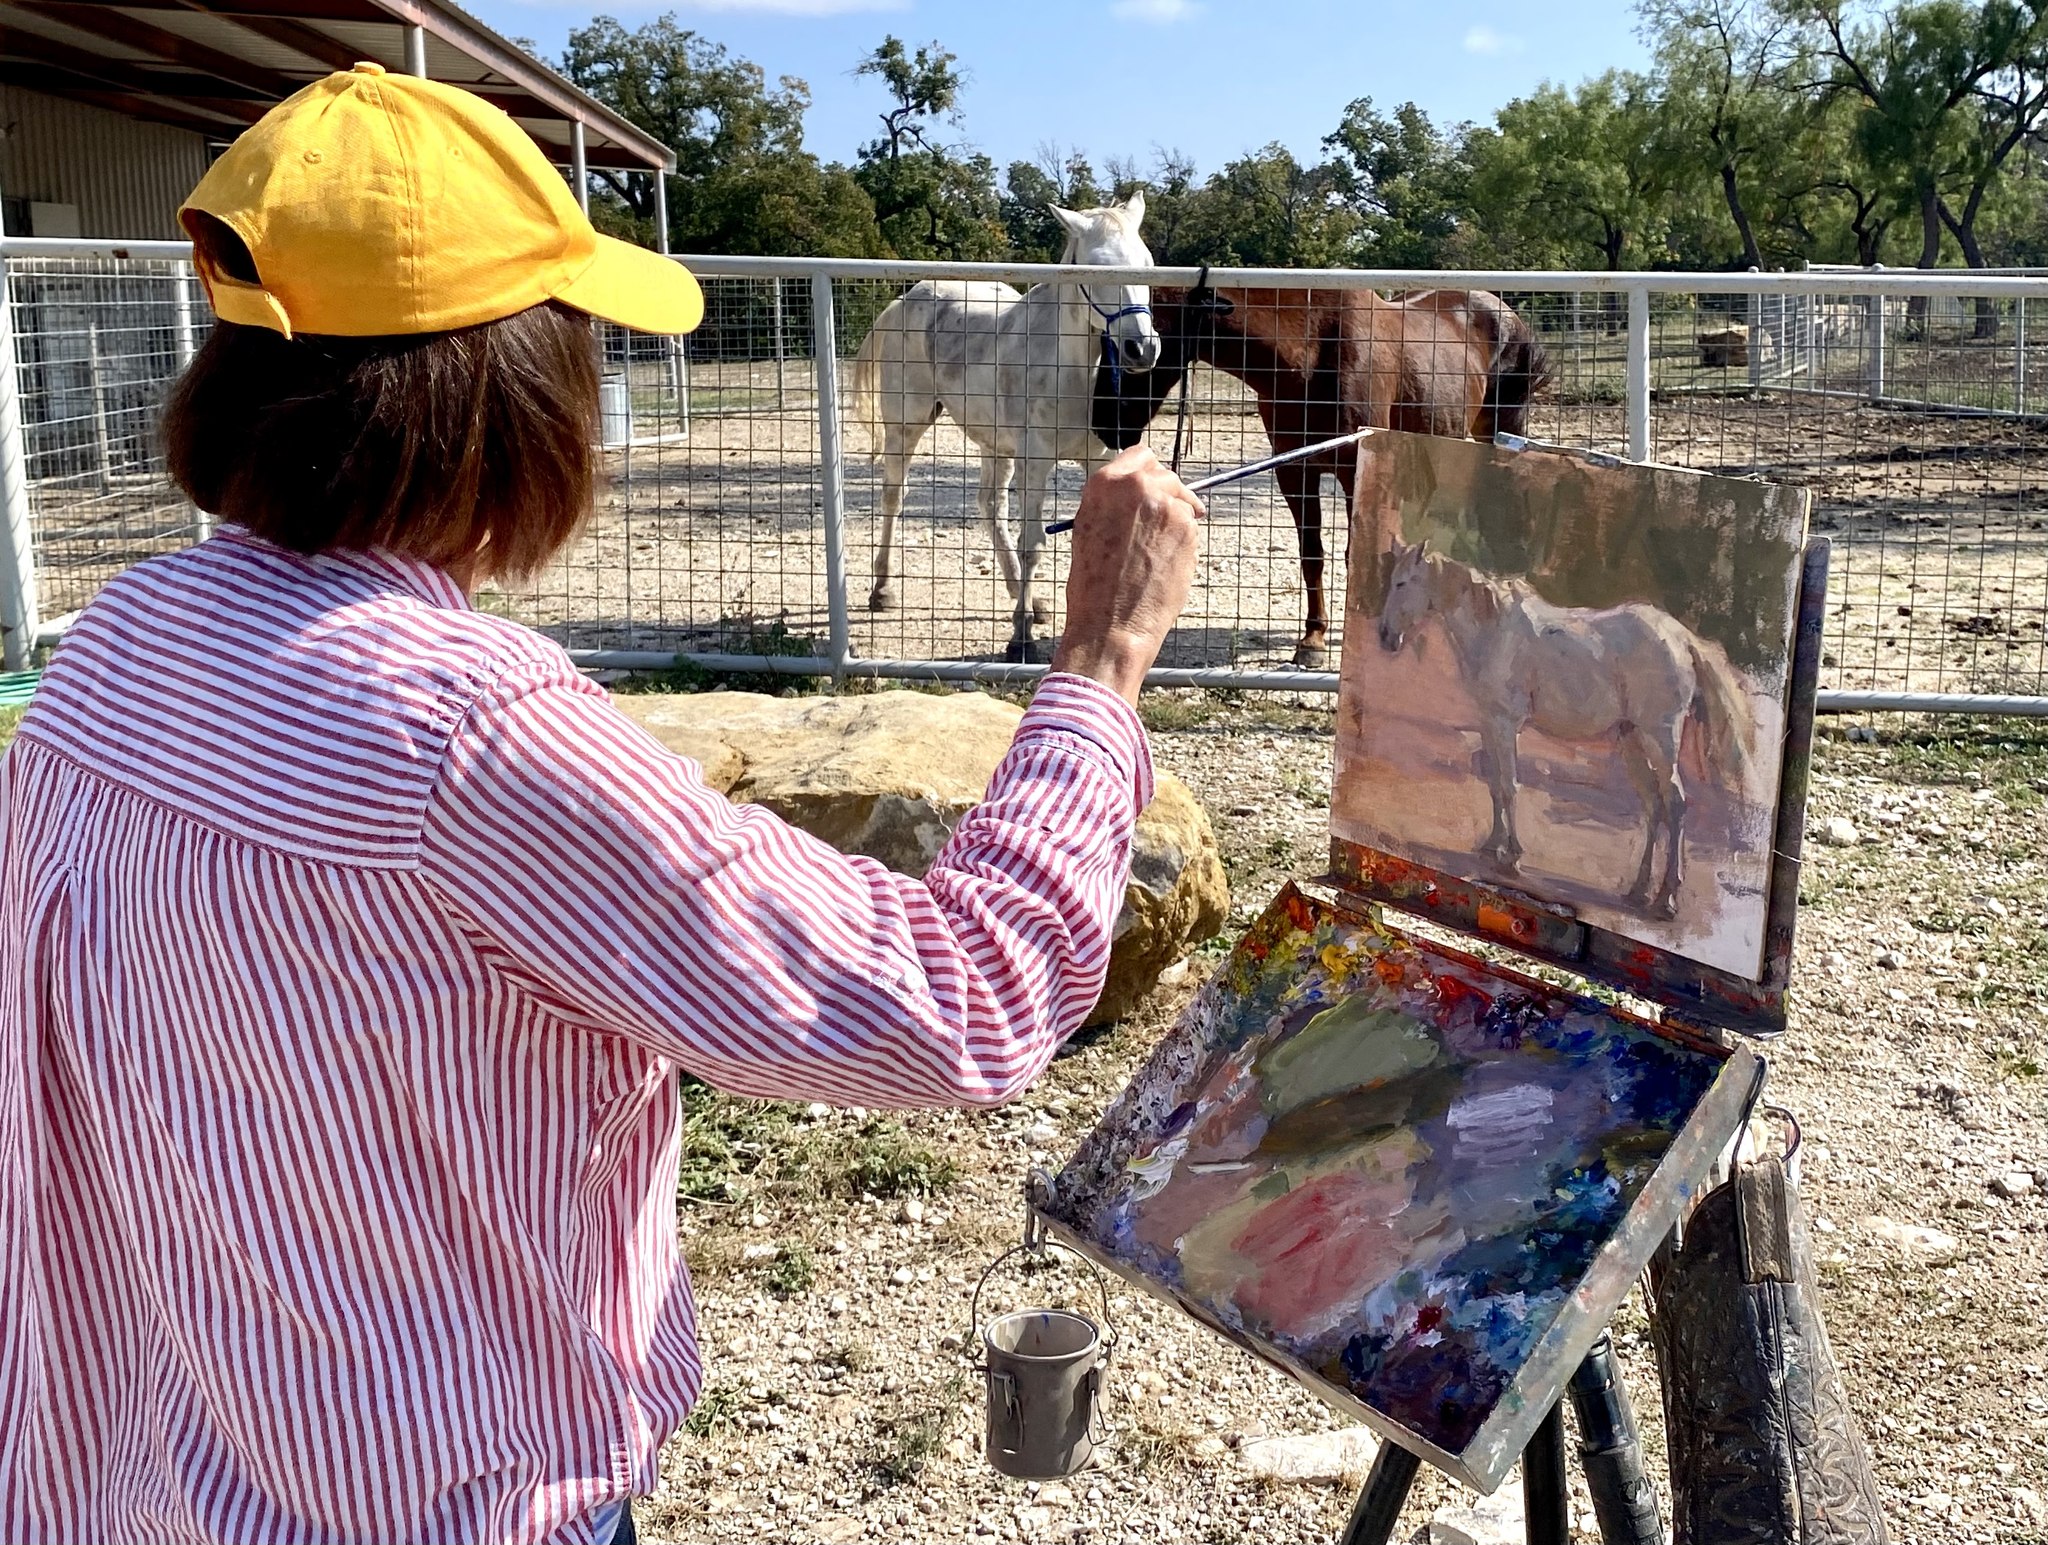 Carolyn Lindsey at the "Door Key Ranch Experience with the Artists"